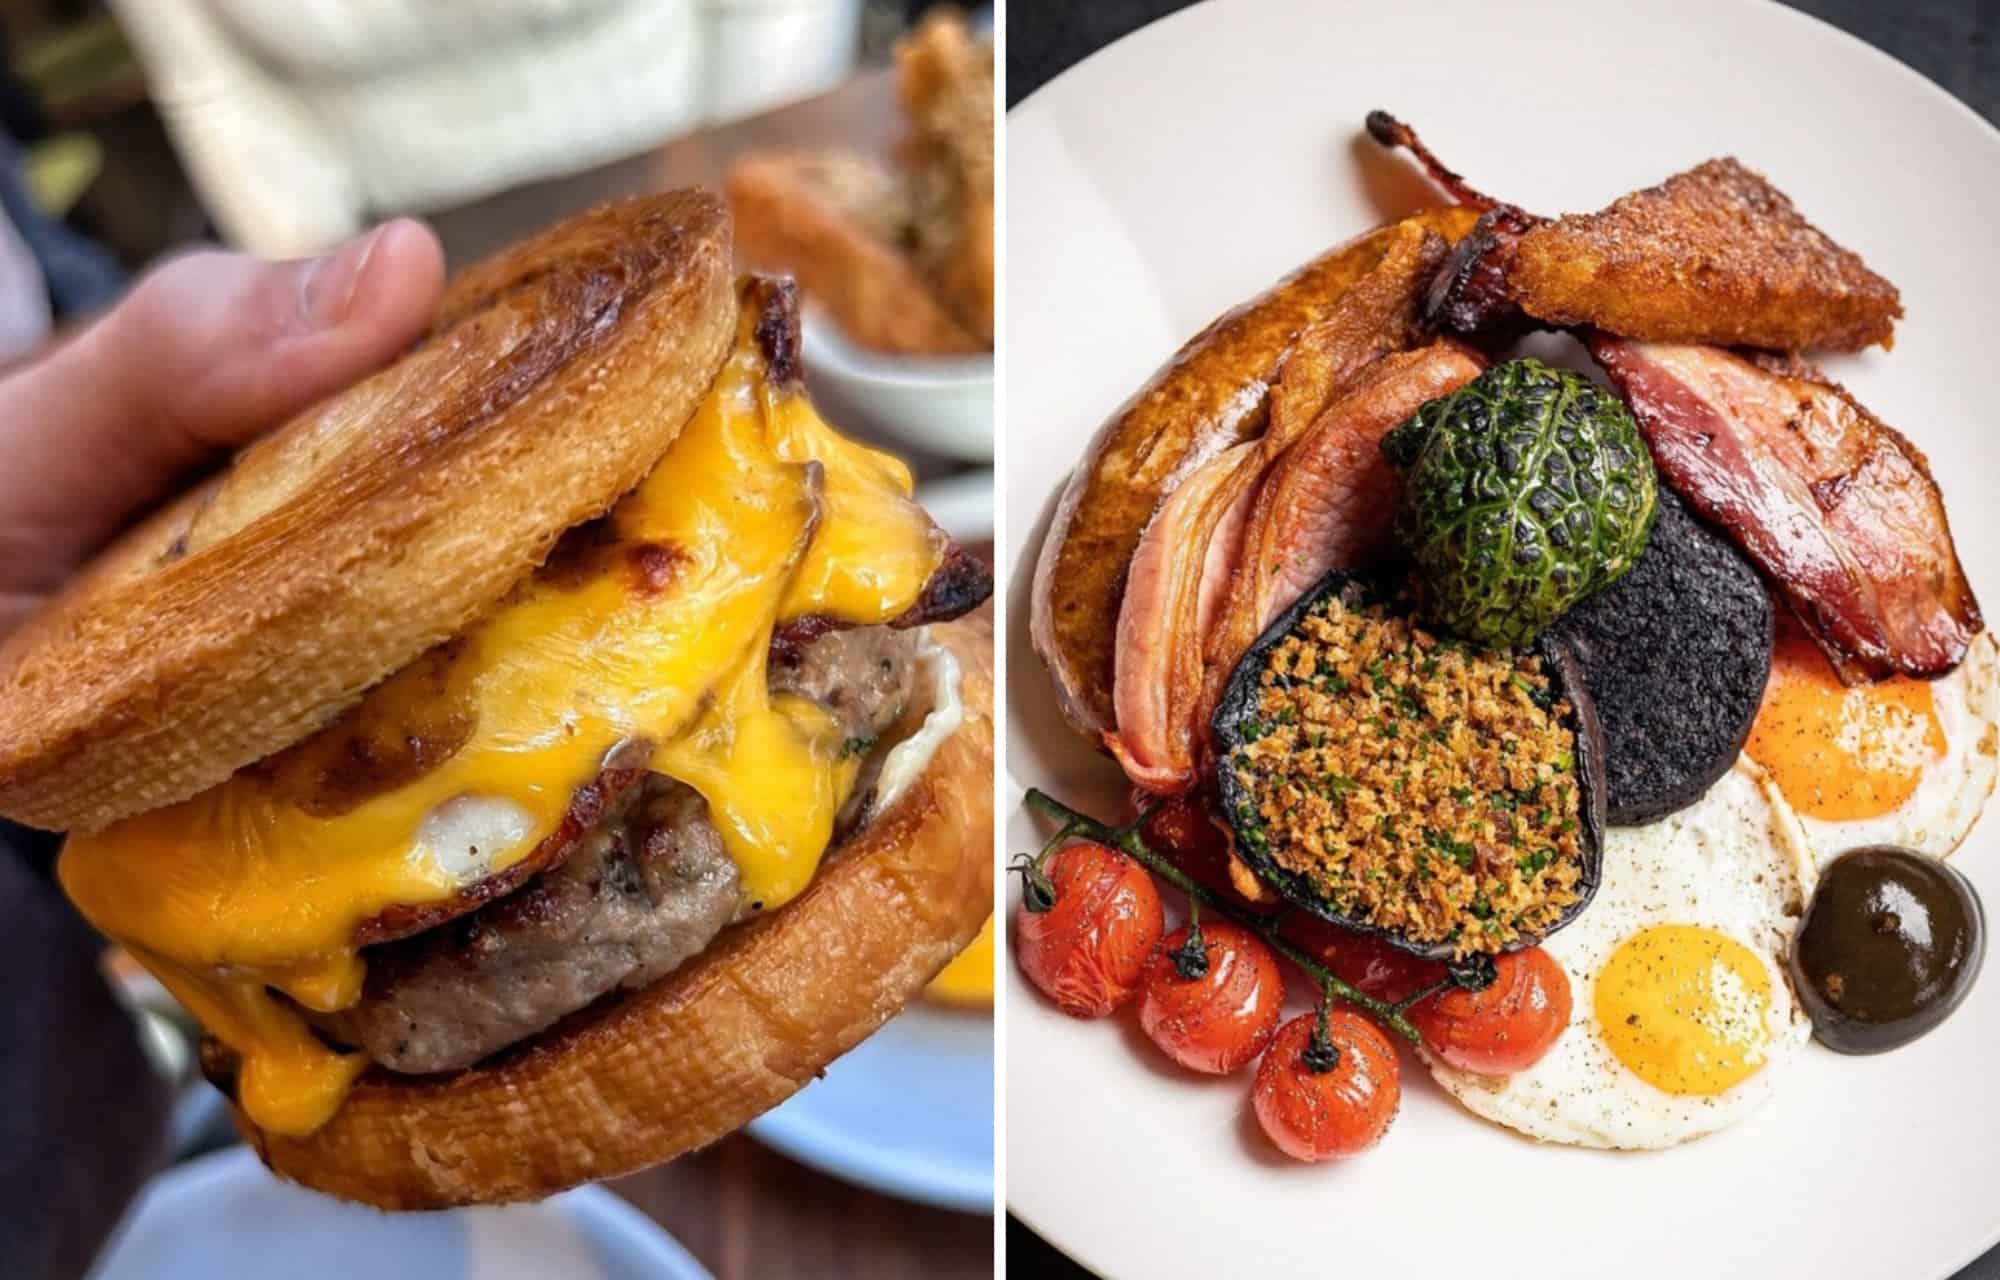 Is this the best brunch spot in London?